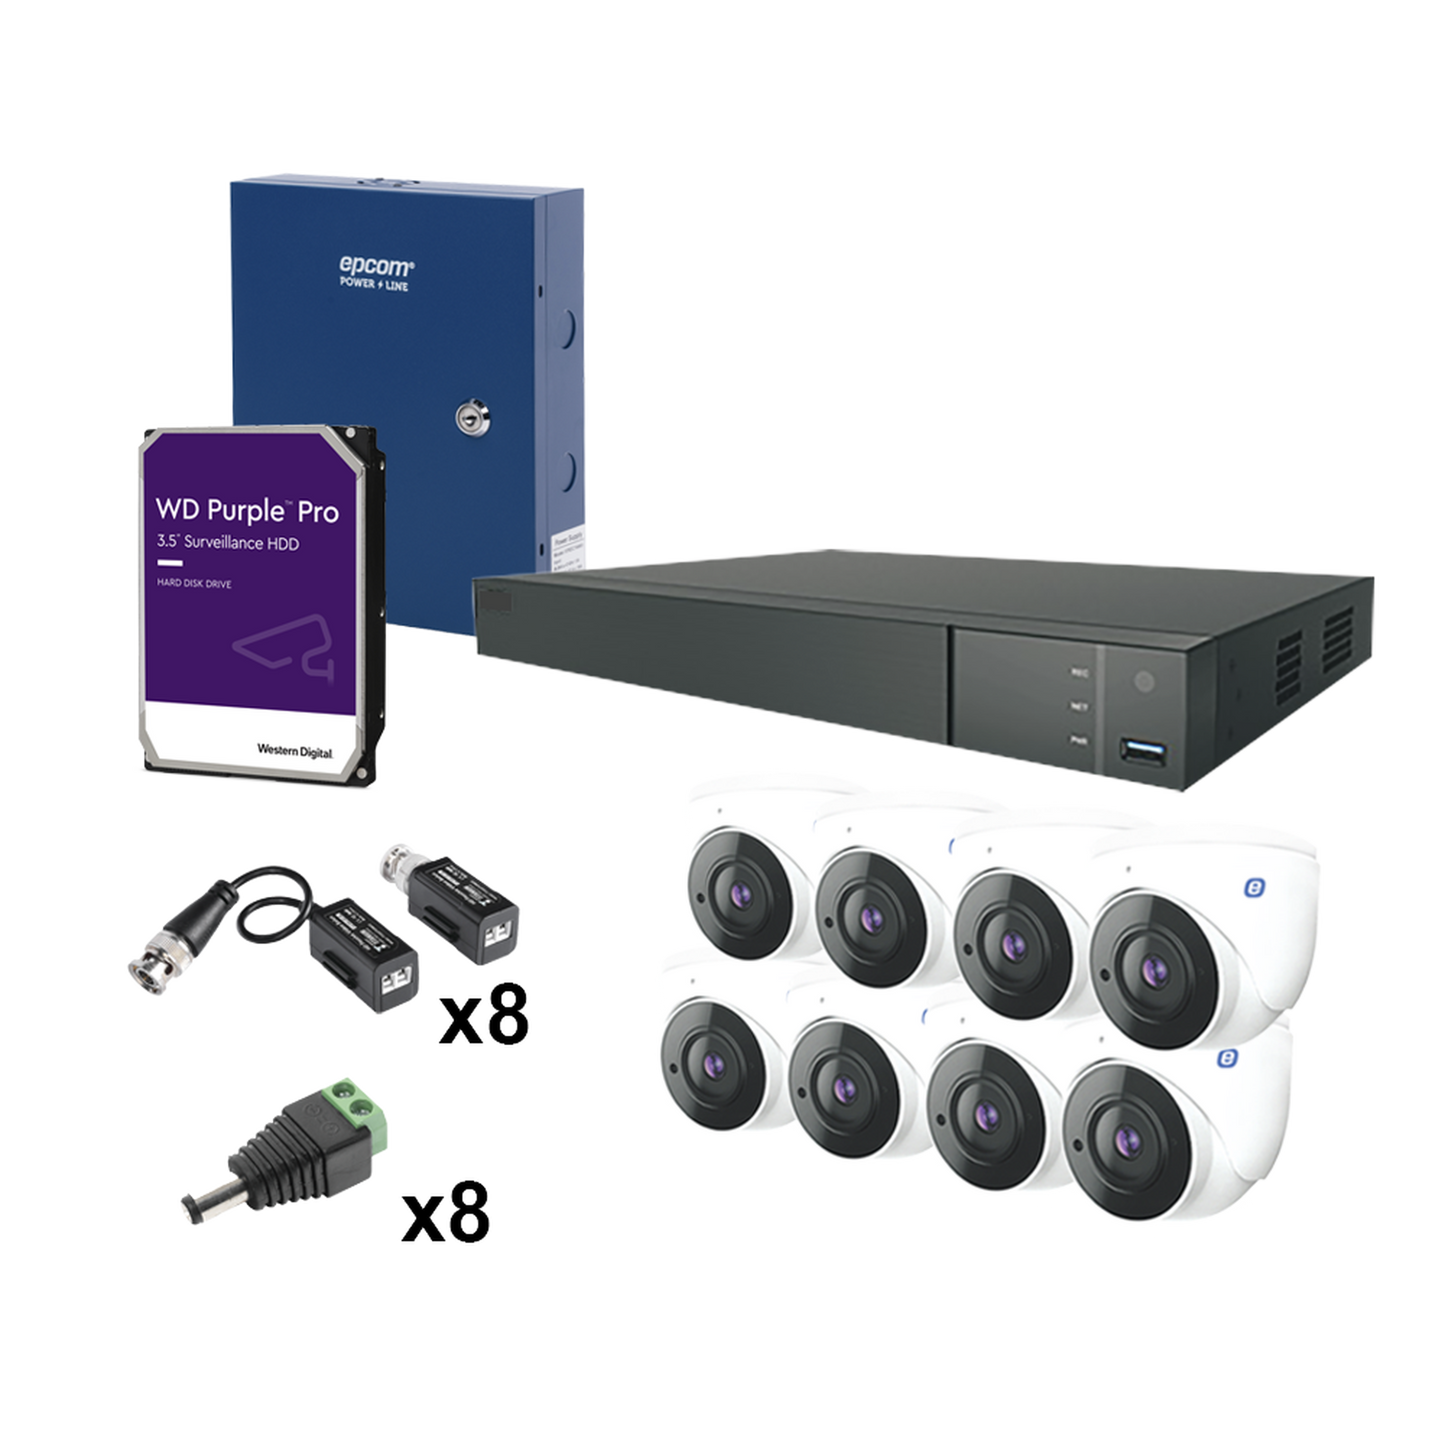 KIT TURBO HD 4K / DVR 8 Channels / 8 Turret Cameras 4K / HDD / Power Supply / Transceivers / Connectors